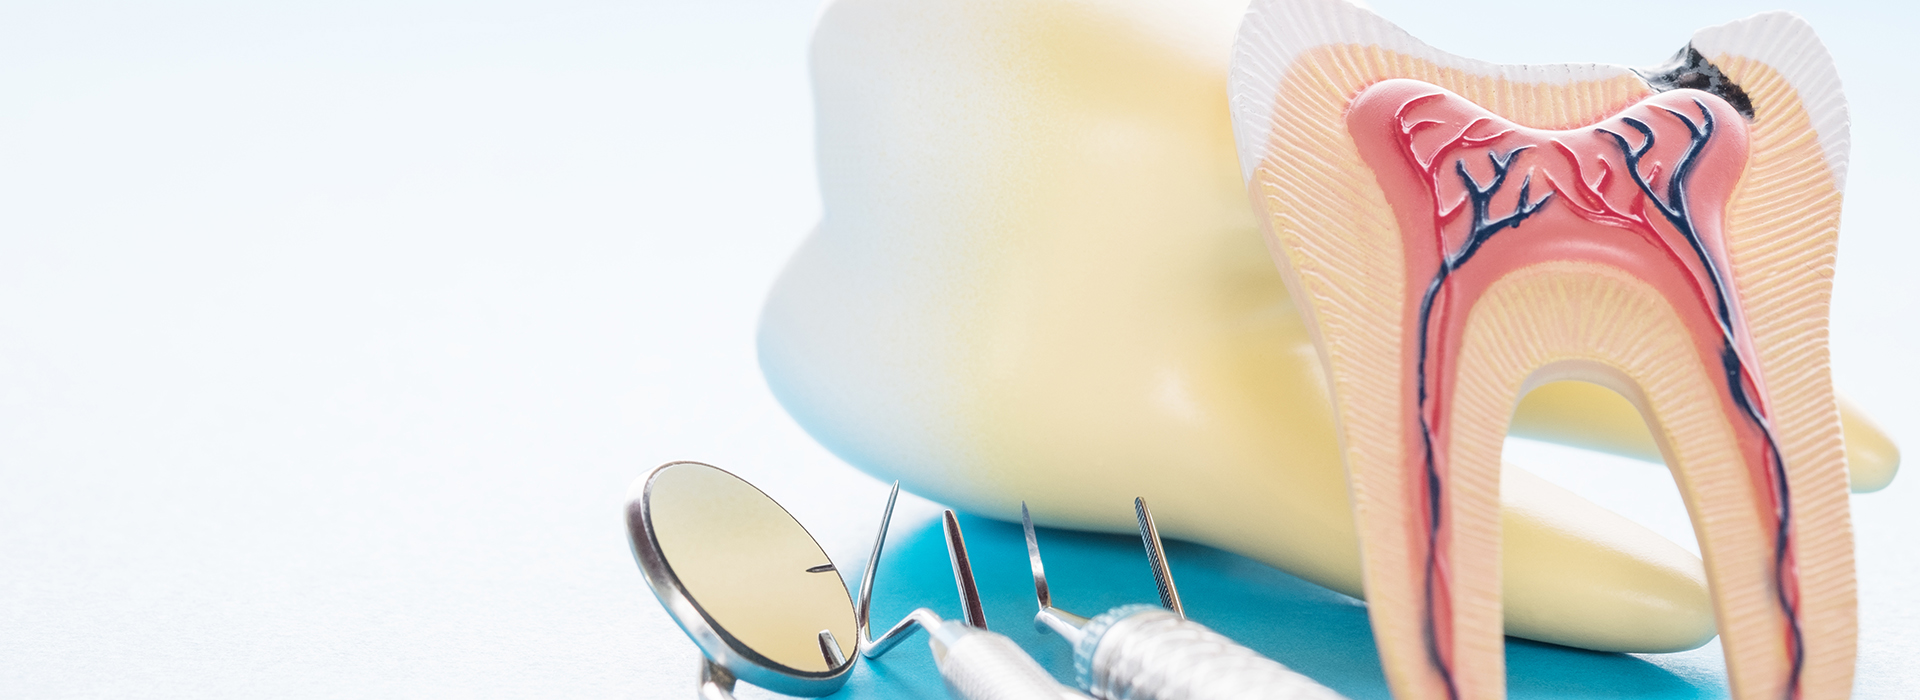 Simi Valley Root Canals